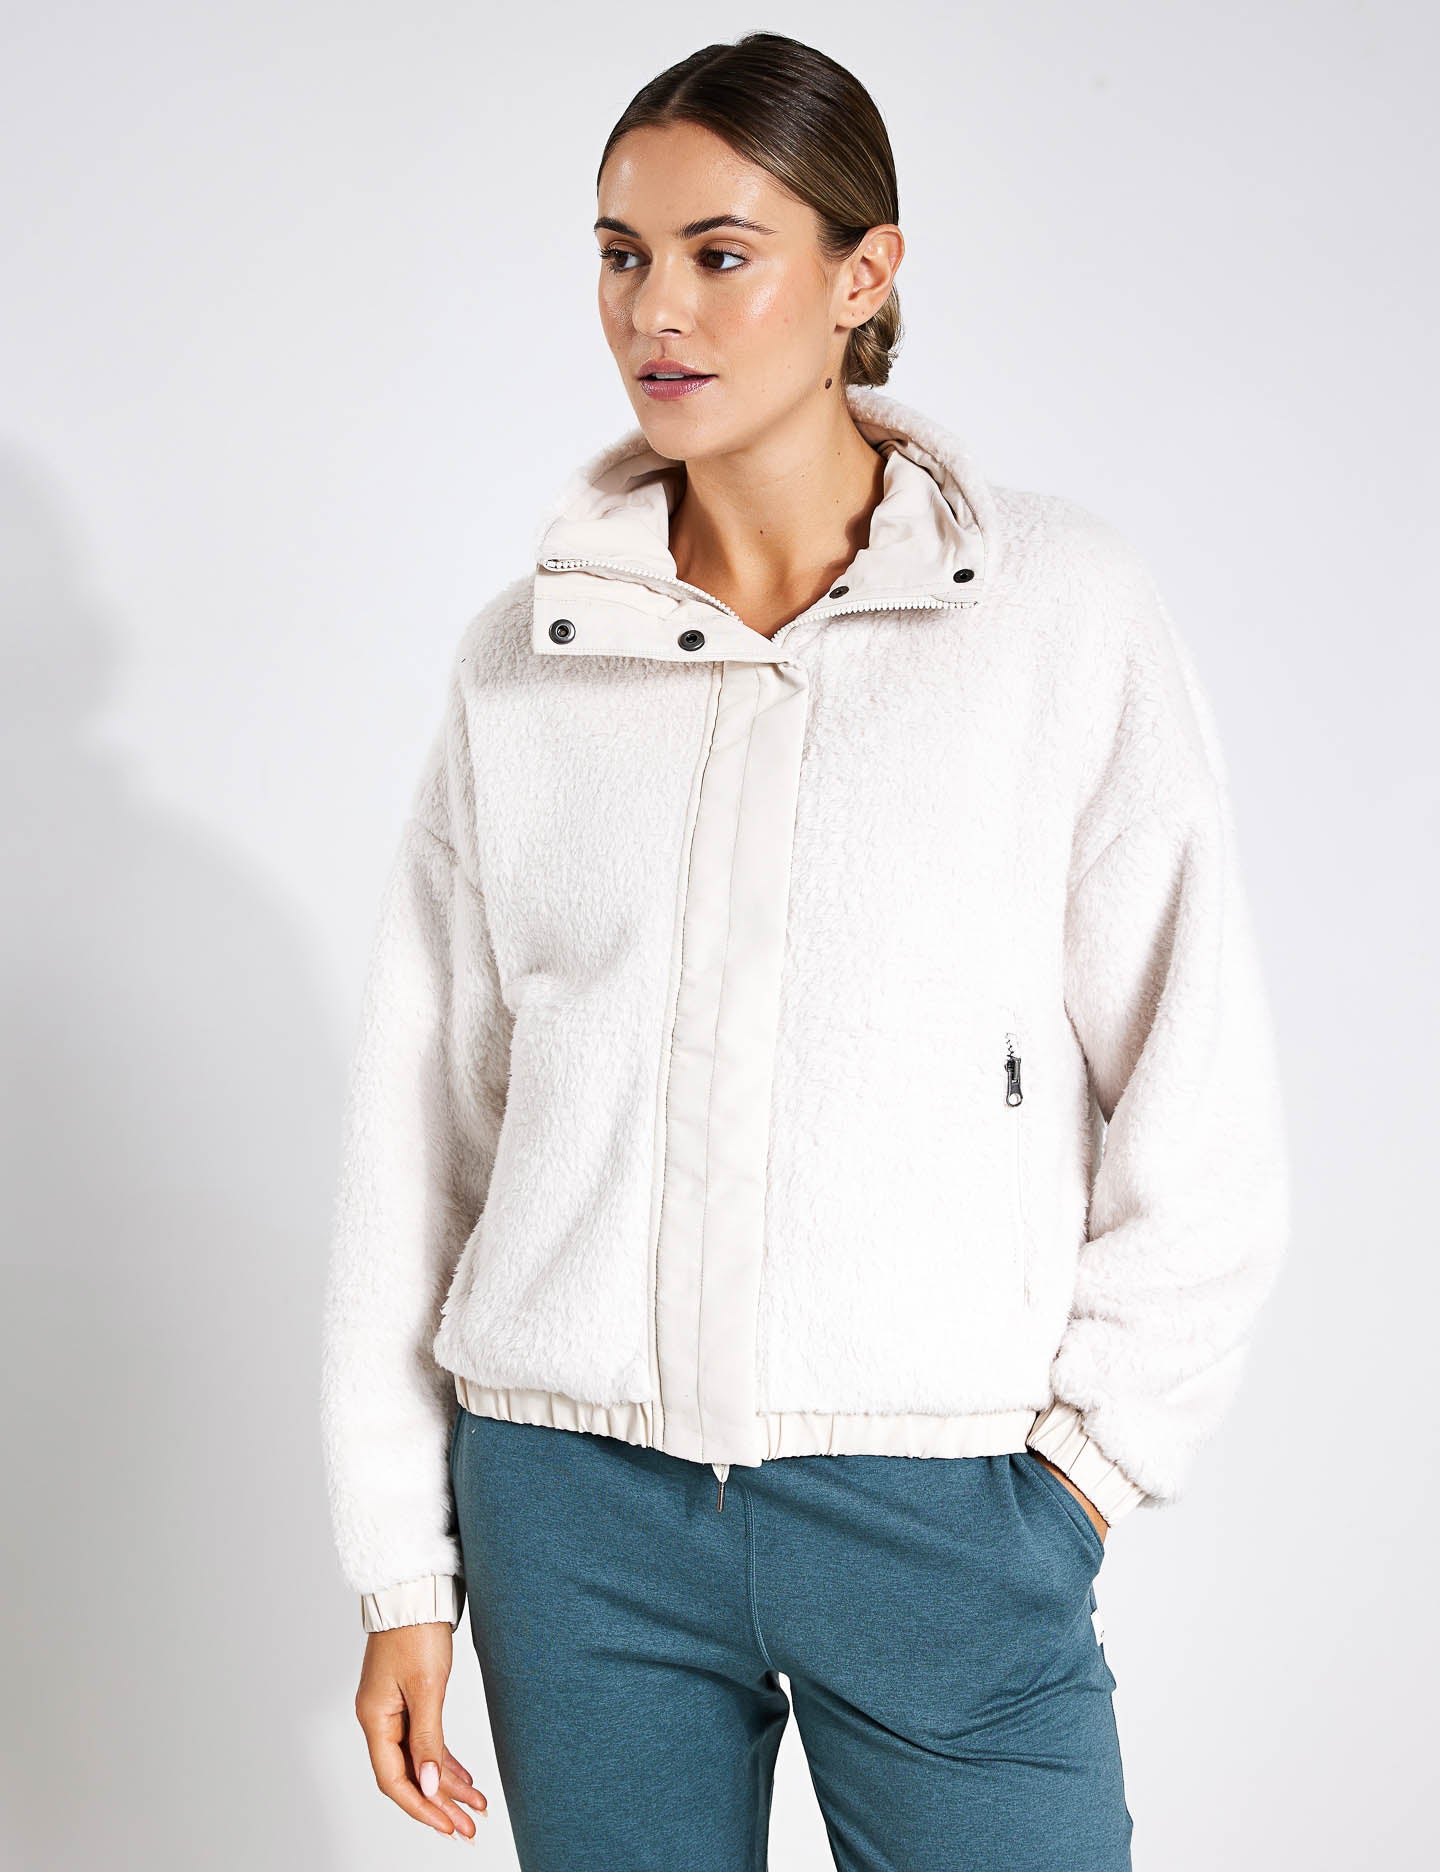 NEW Urban Outfitters Cozy Sherpa Ivory & Black Full Zip Jacket Men's Small  UO